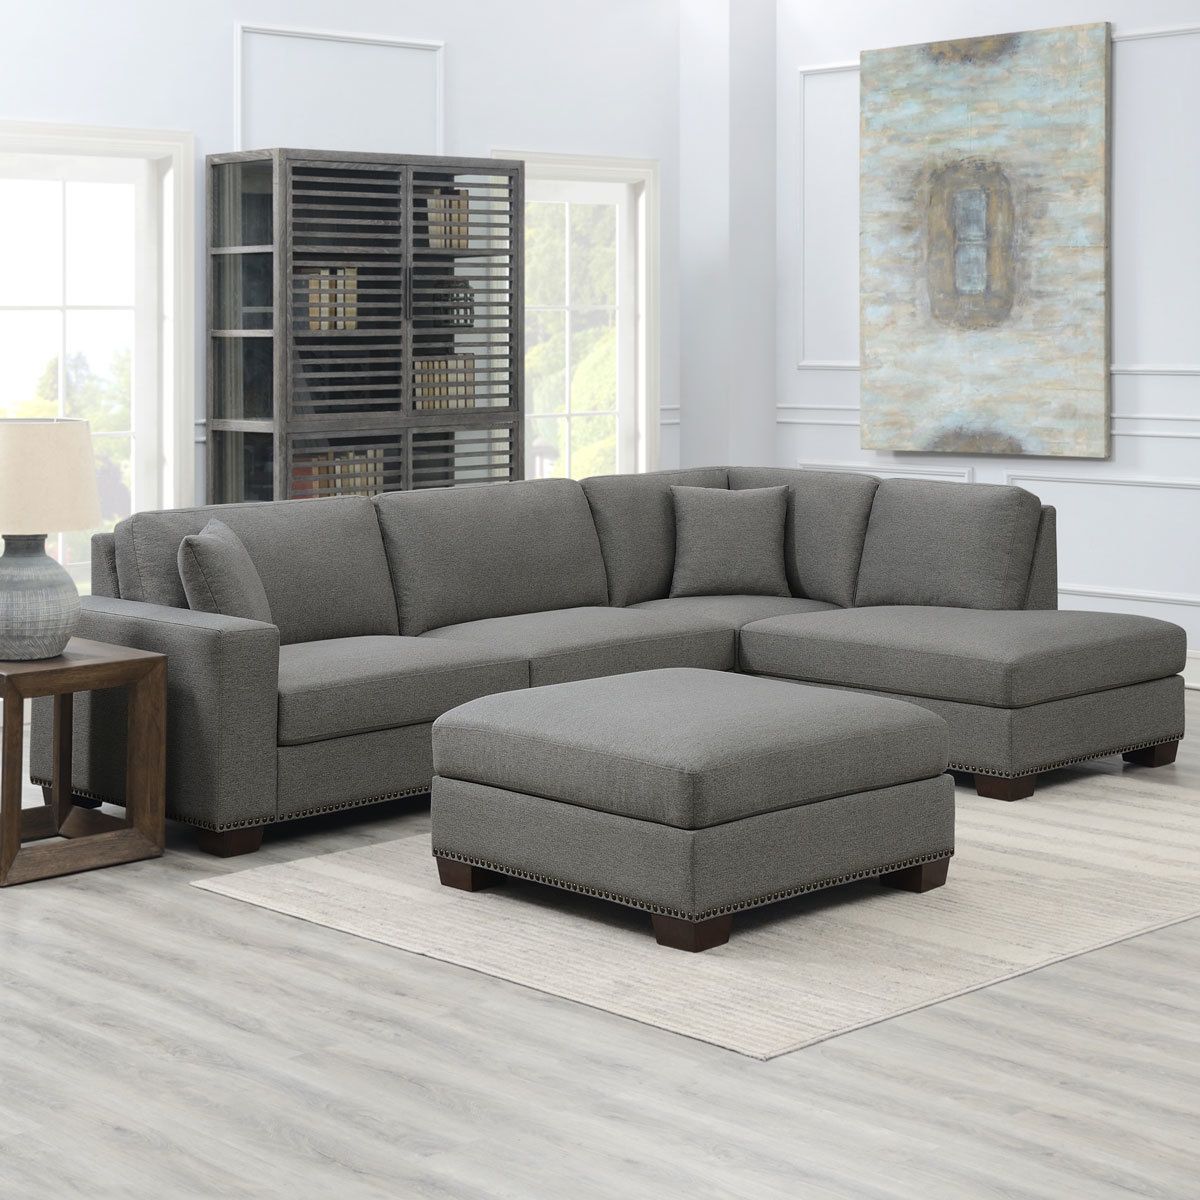 Thomasville Artesia Grey Fabric Sectional Sofa With Ottoman, Right In Sofas With Ottomans (View 12 of 20)